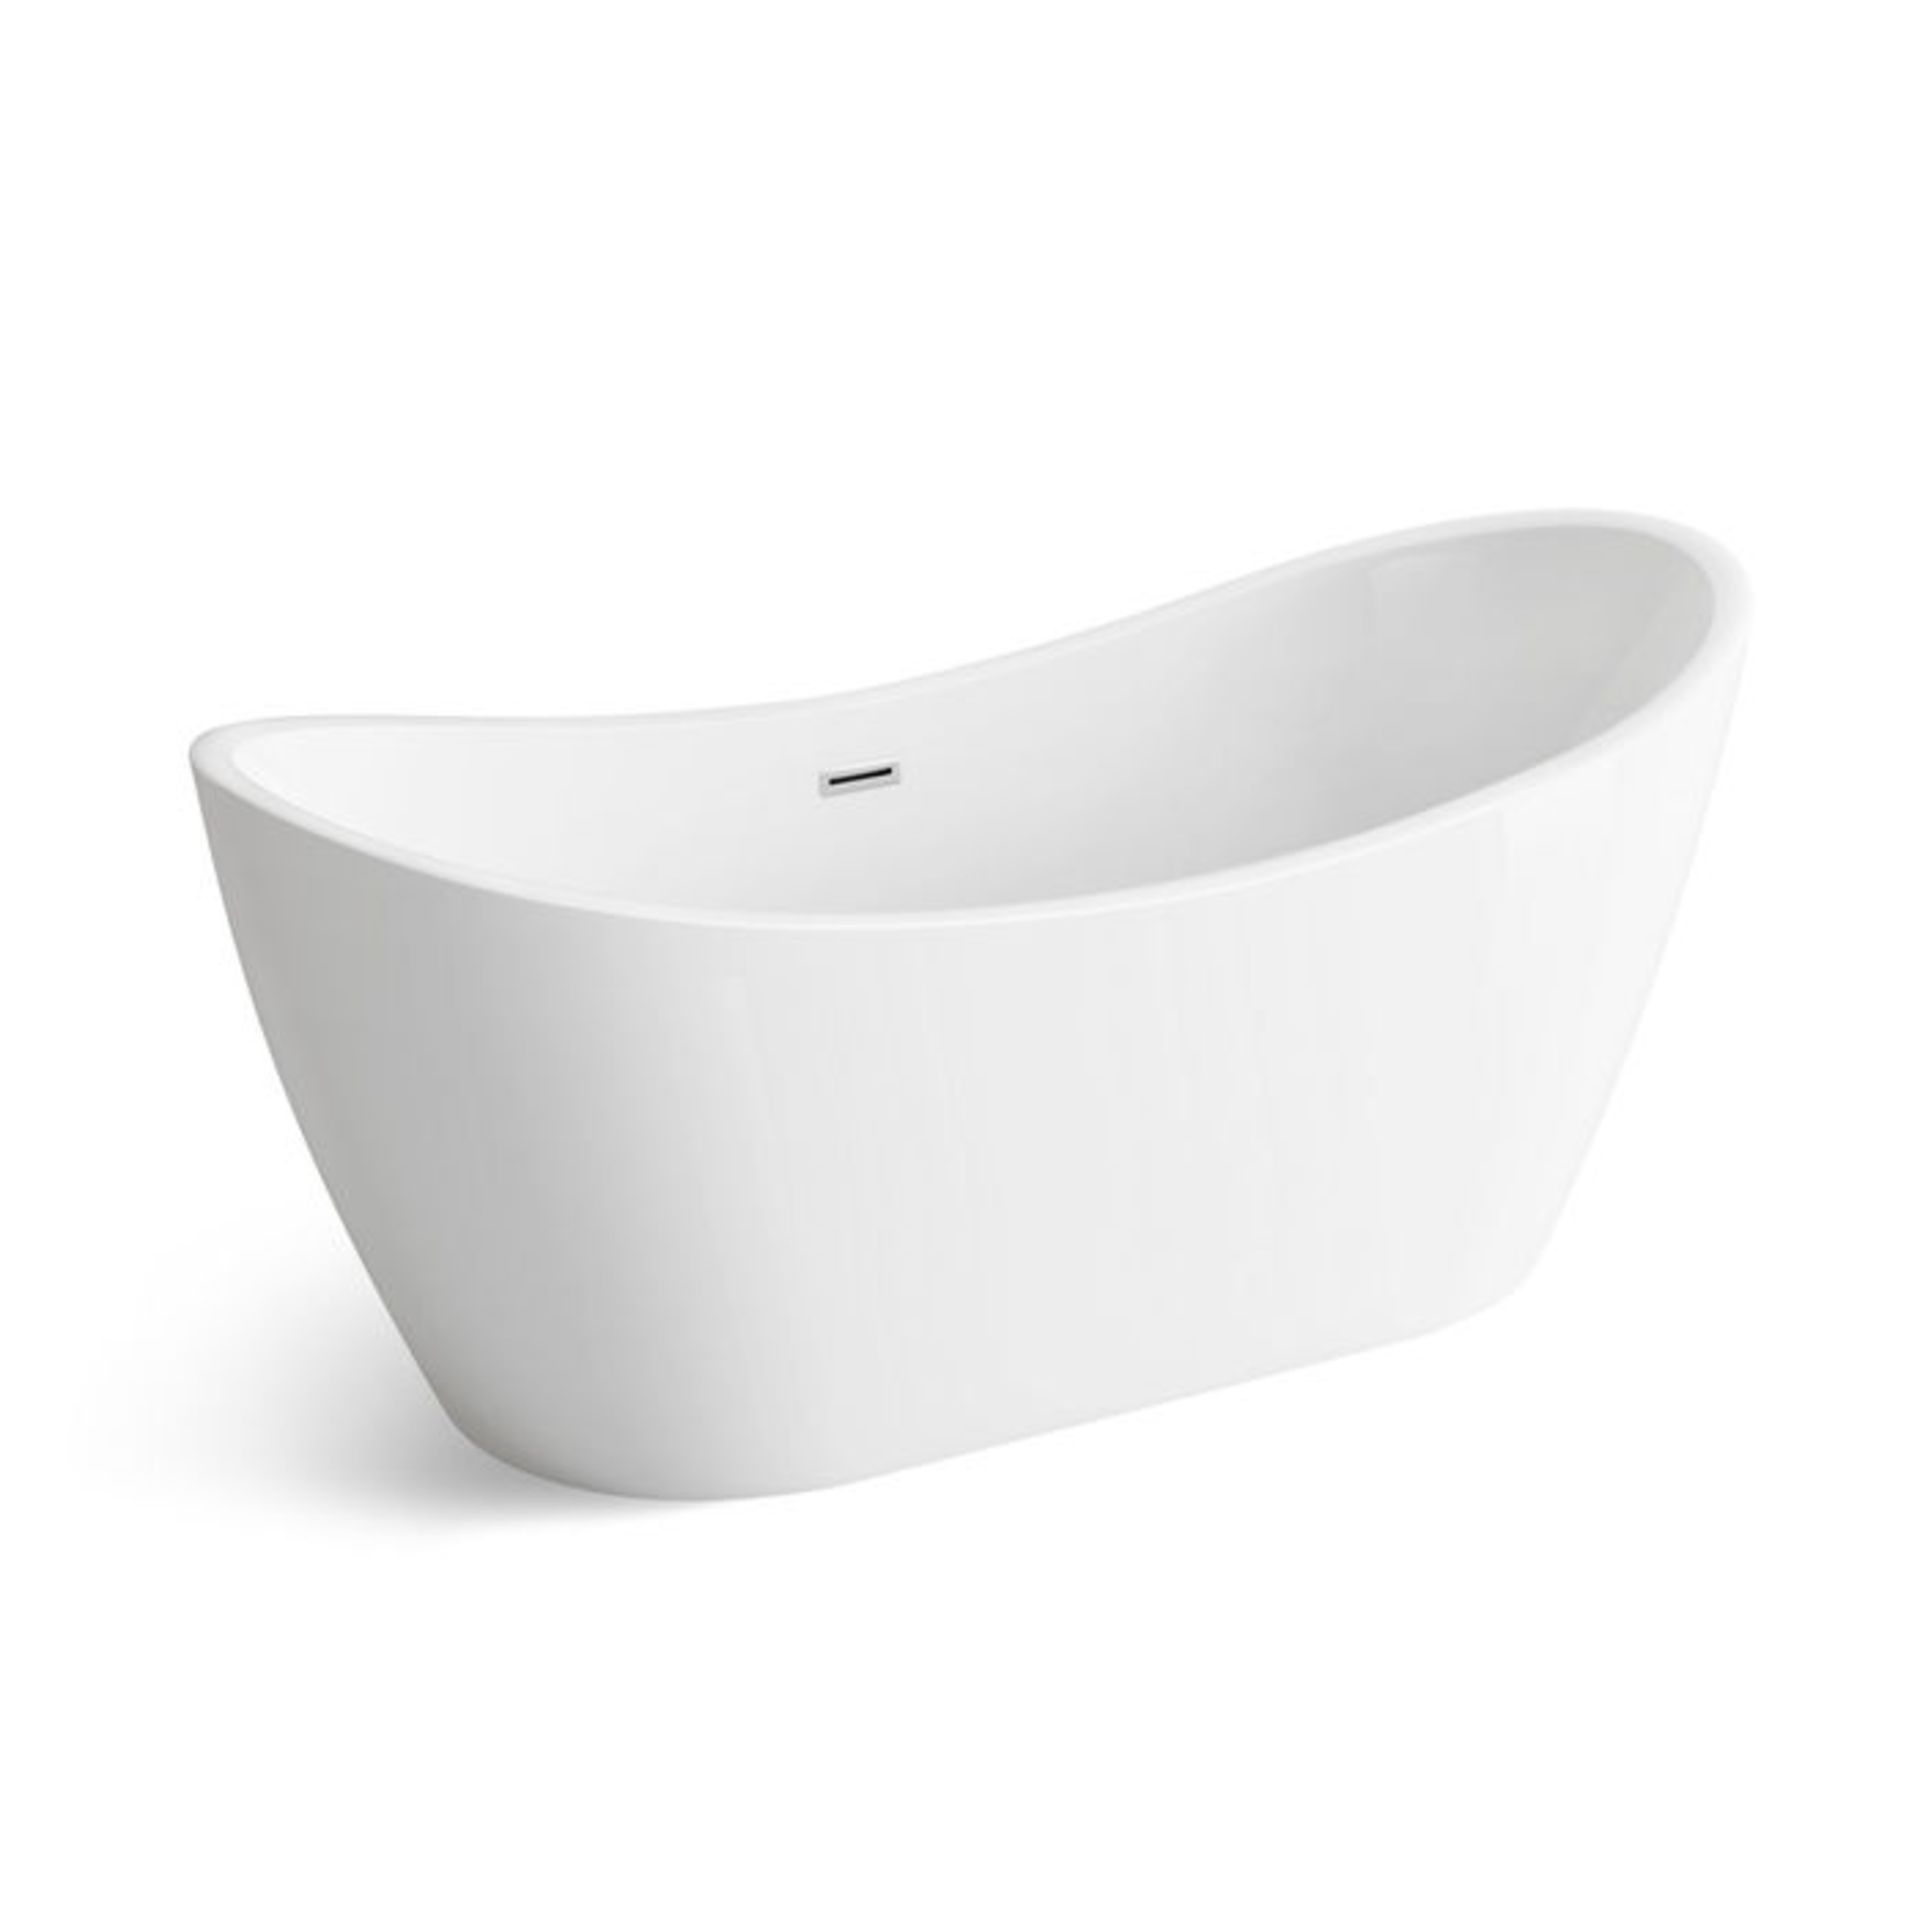 (T4) 1700mm x 710mm Caitlyn Freestanding Bath. Visually Simplistic To Suit Any Bathroom Interio... - Image 2 of 4